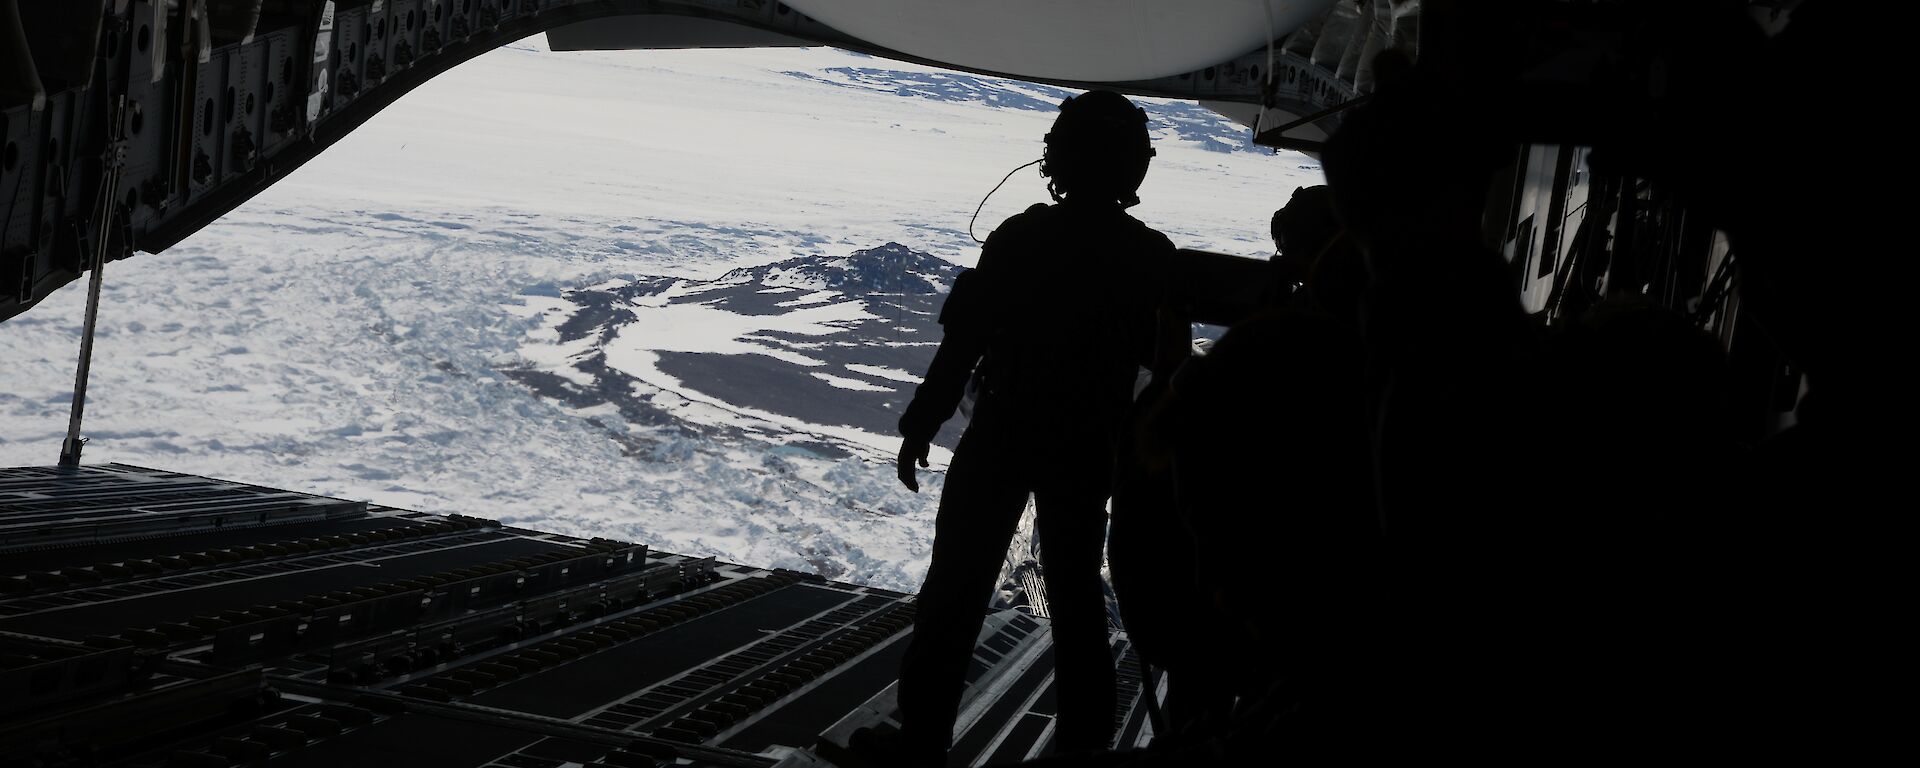 A silhouette of a person facing the back of an open c17a aircraft before an airdrop